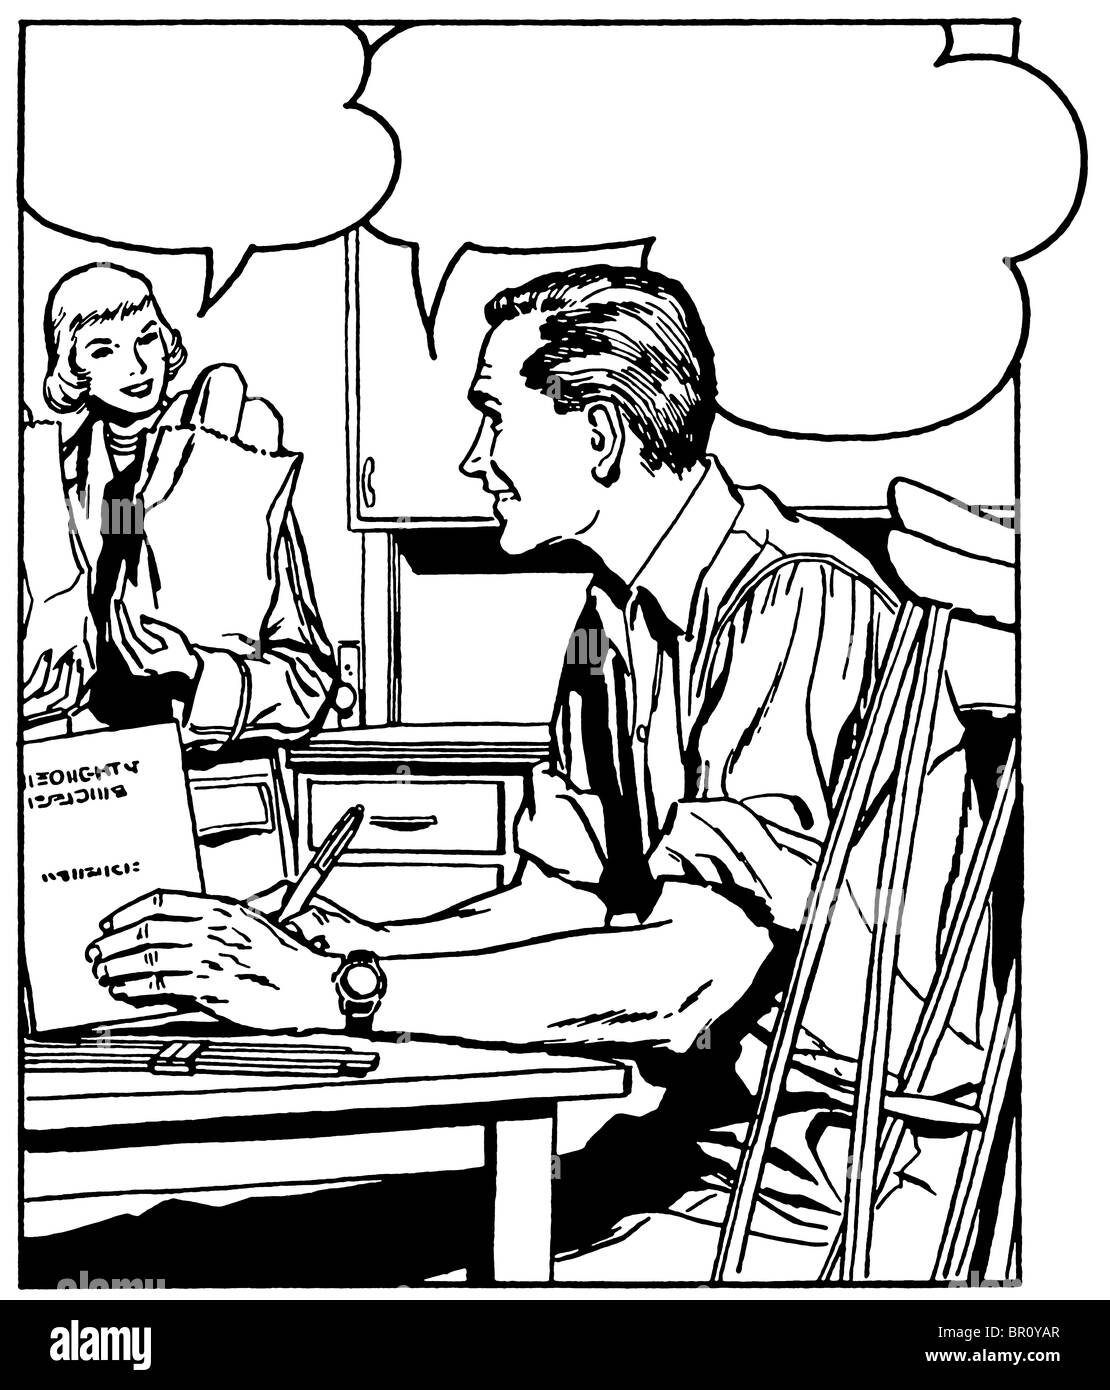 A black an white version of a comic style illustration of a man at a desk talking to a woman in the background Stock Photo